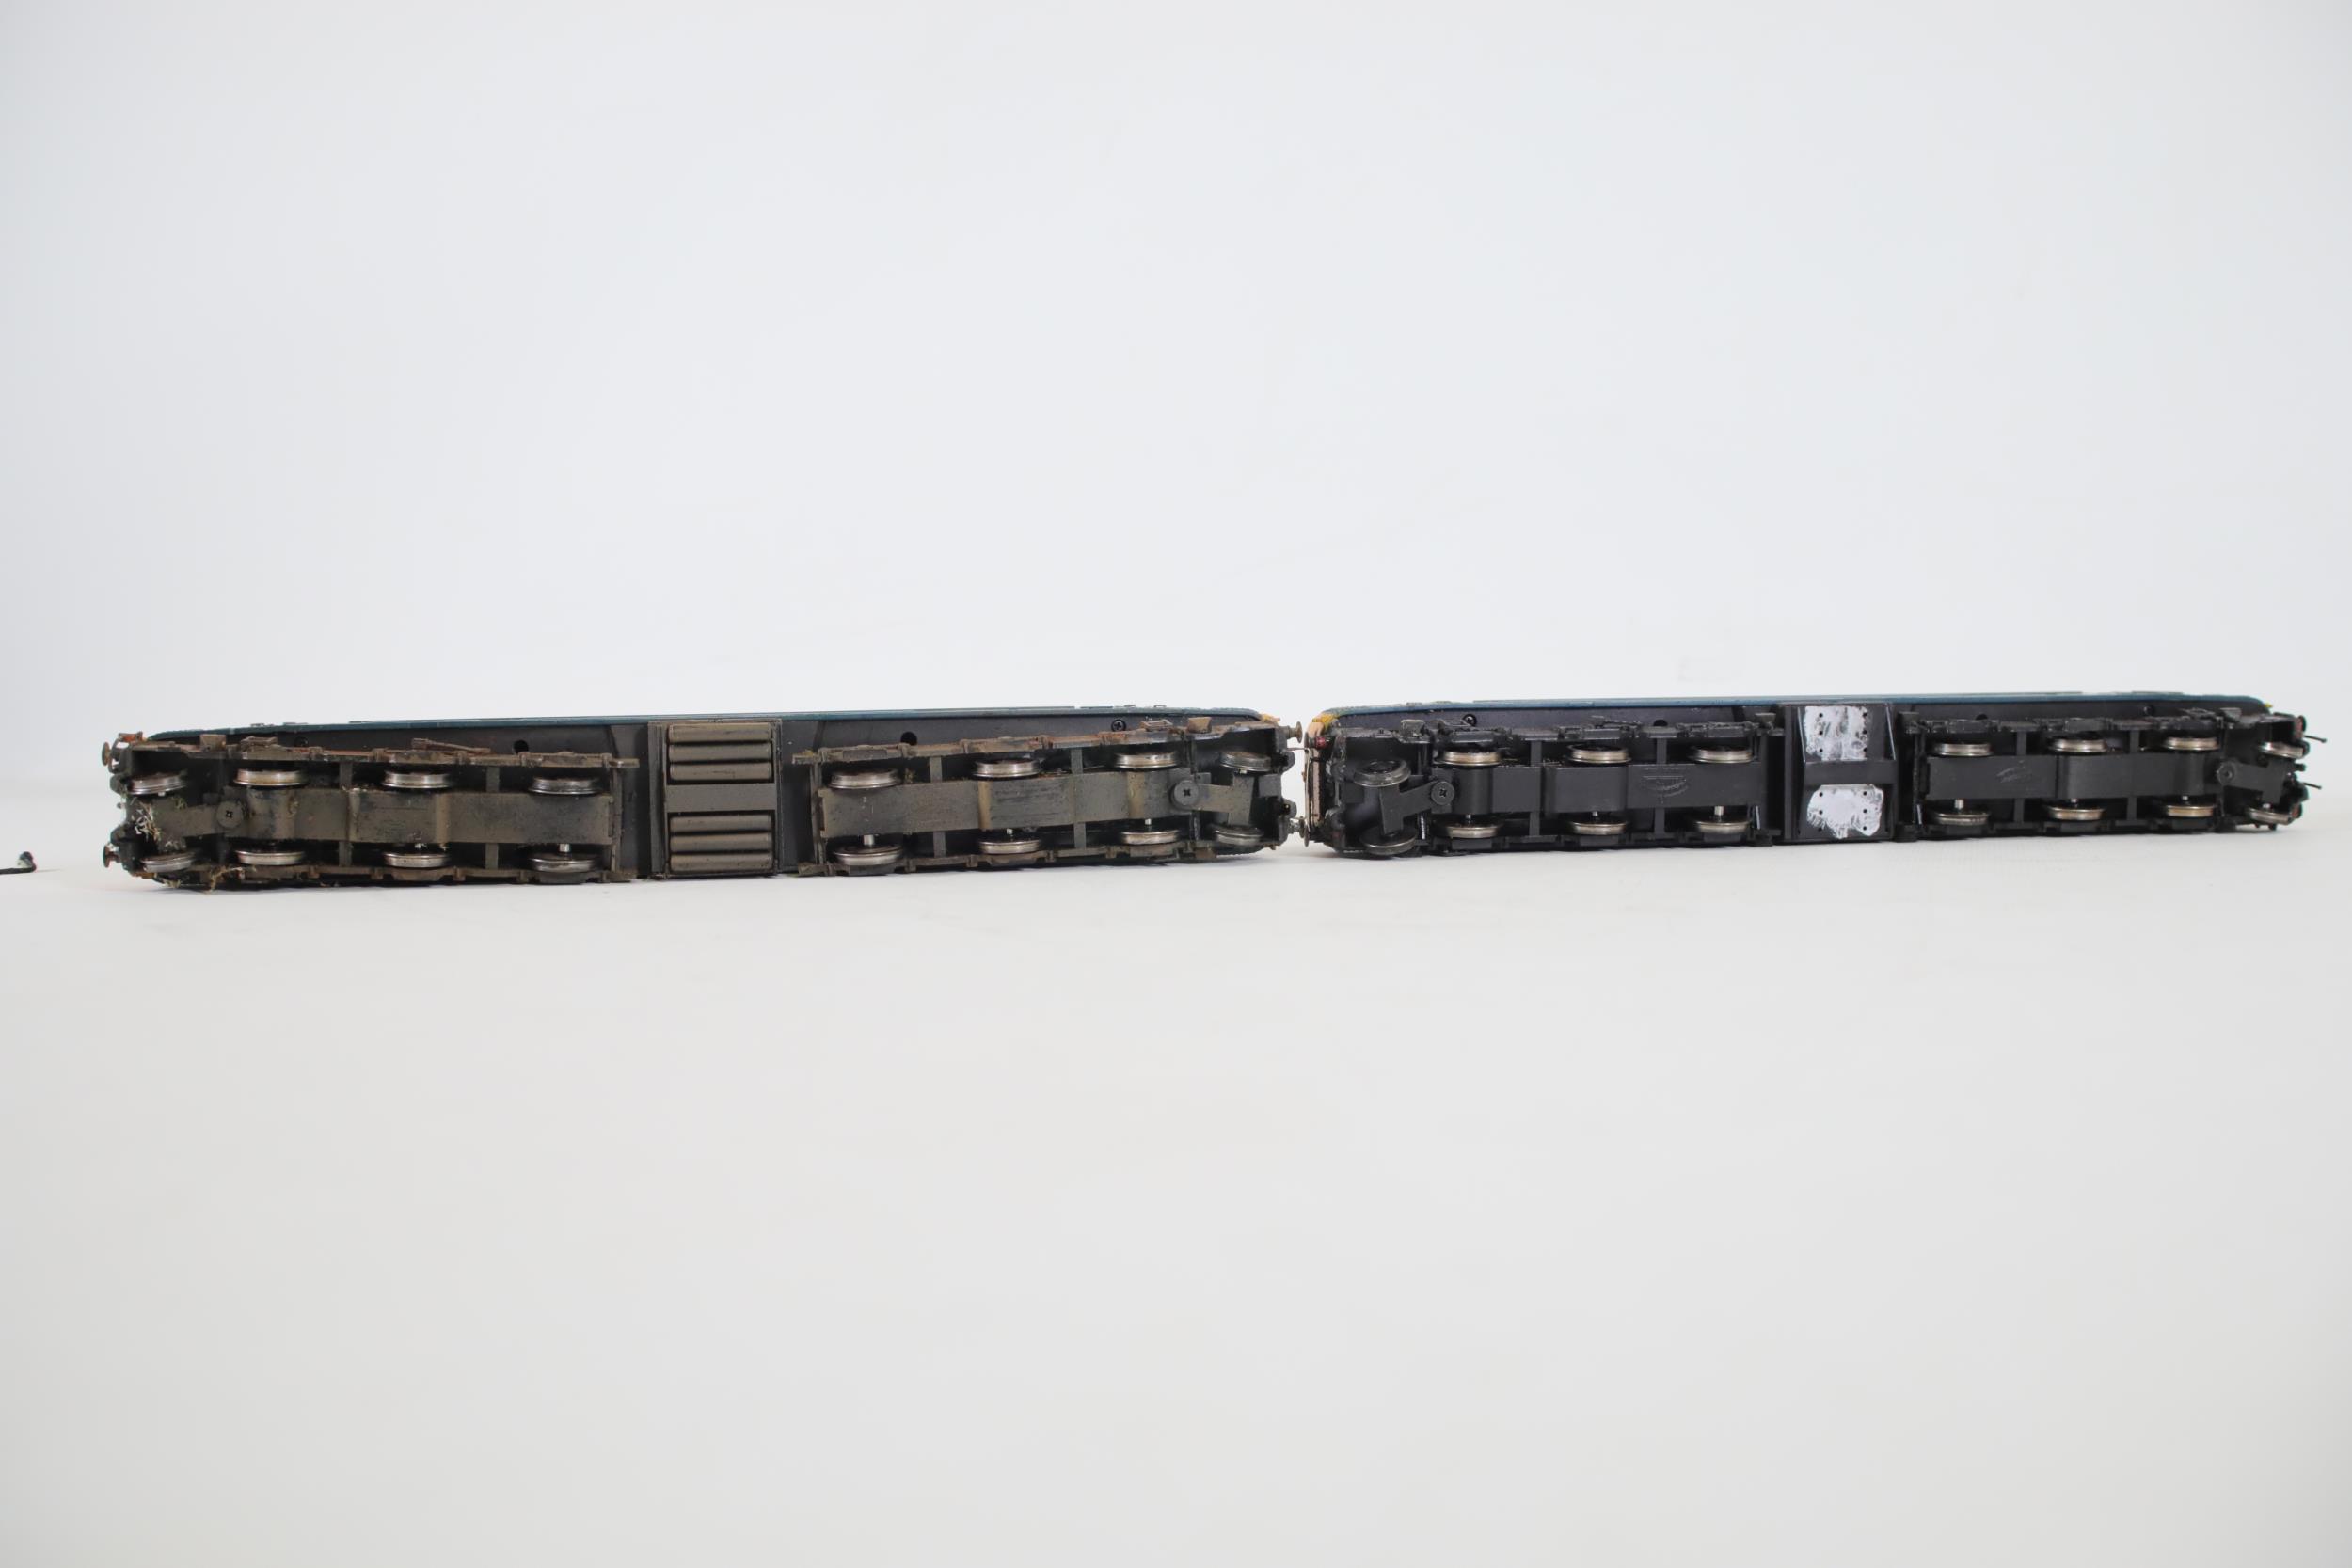 2 Bachmann BR Blue OO Gauge Locomotives Class 45 45037 and 45025 - Image 7 of 8